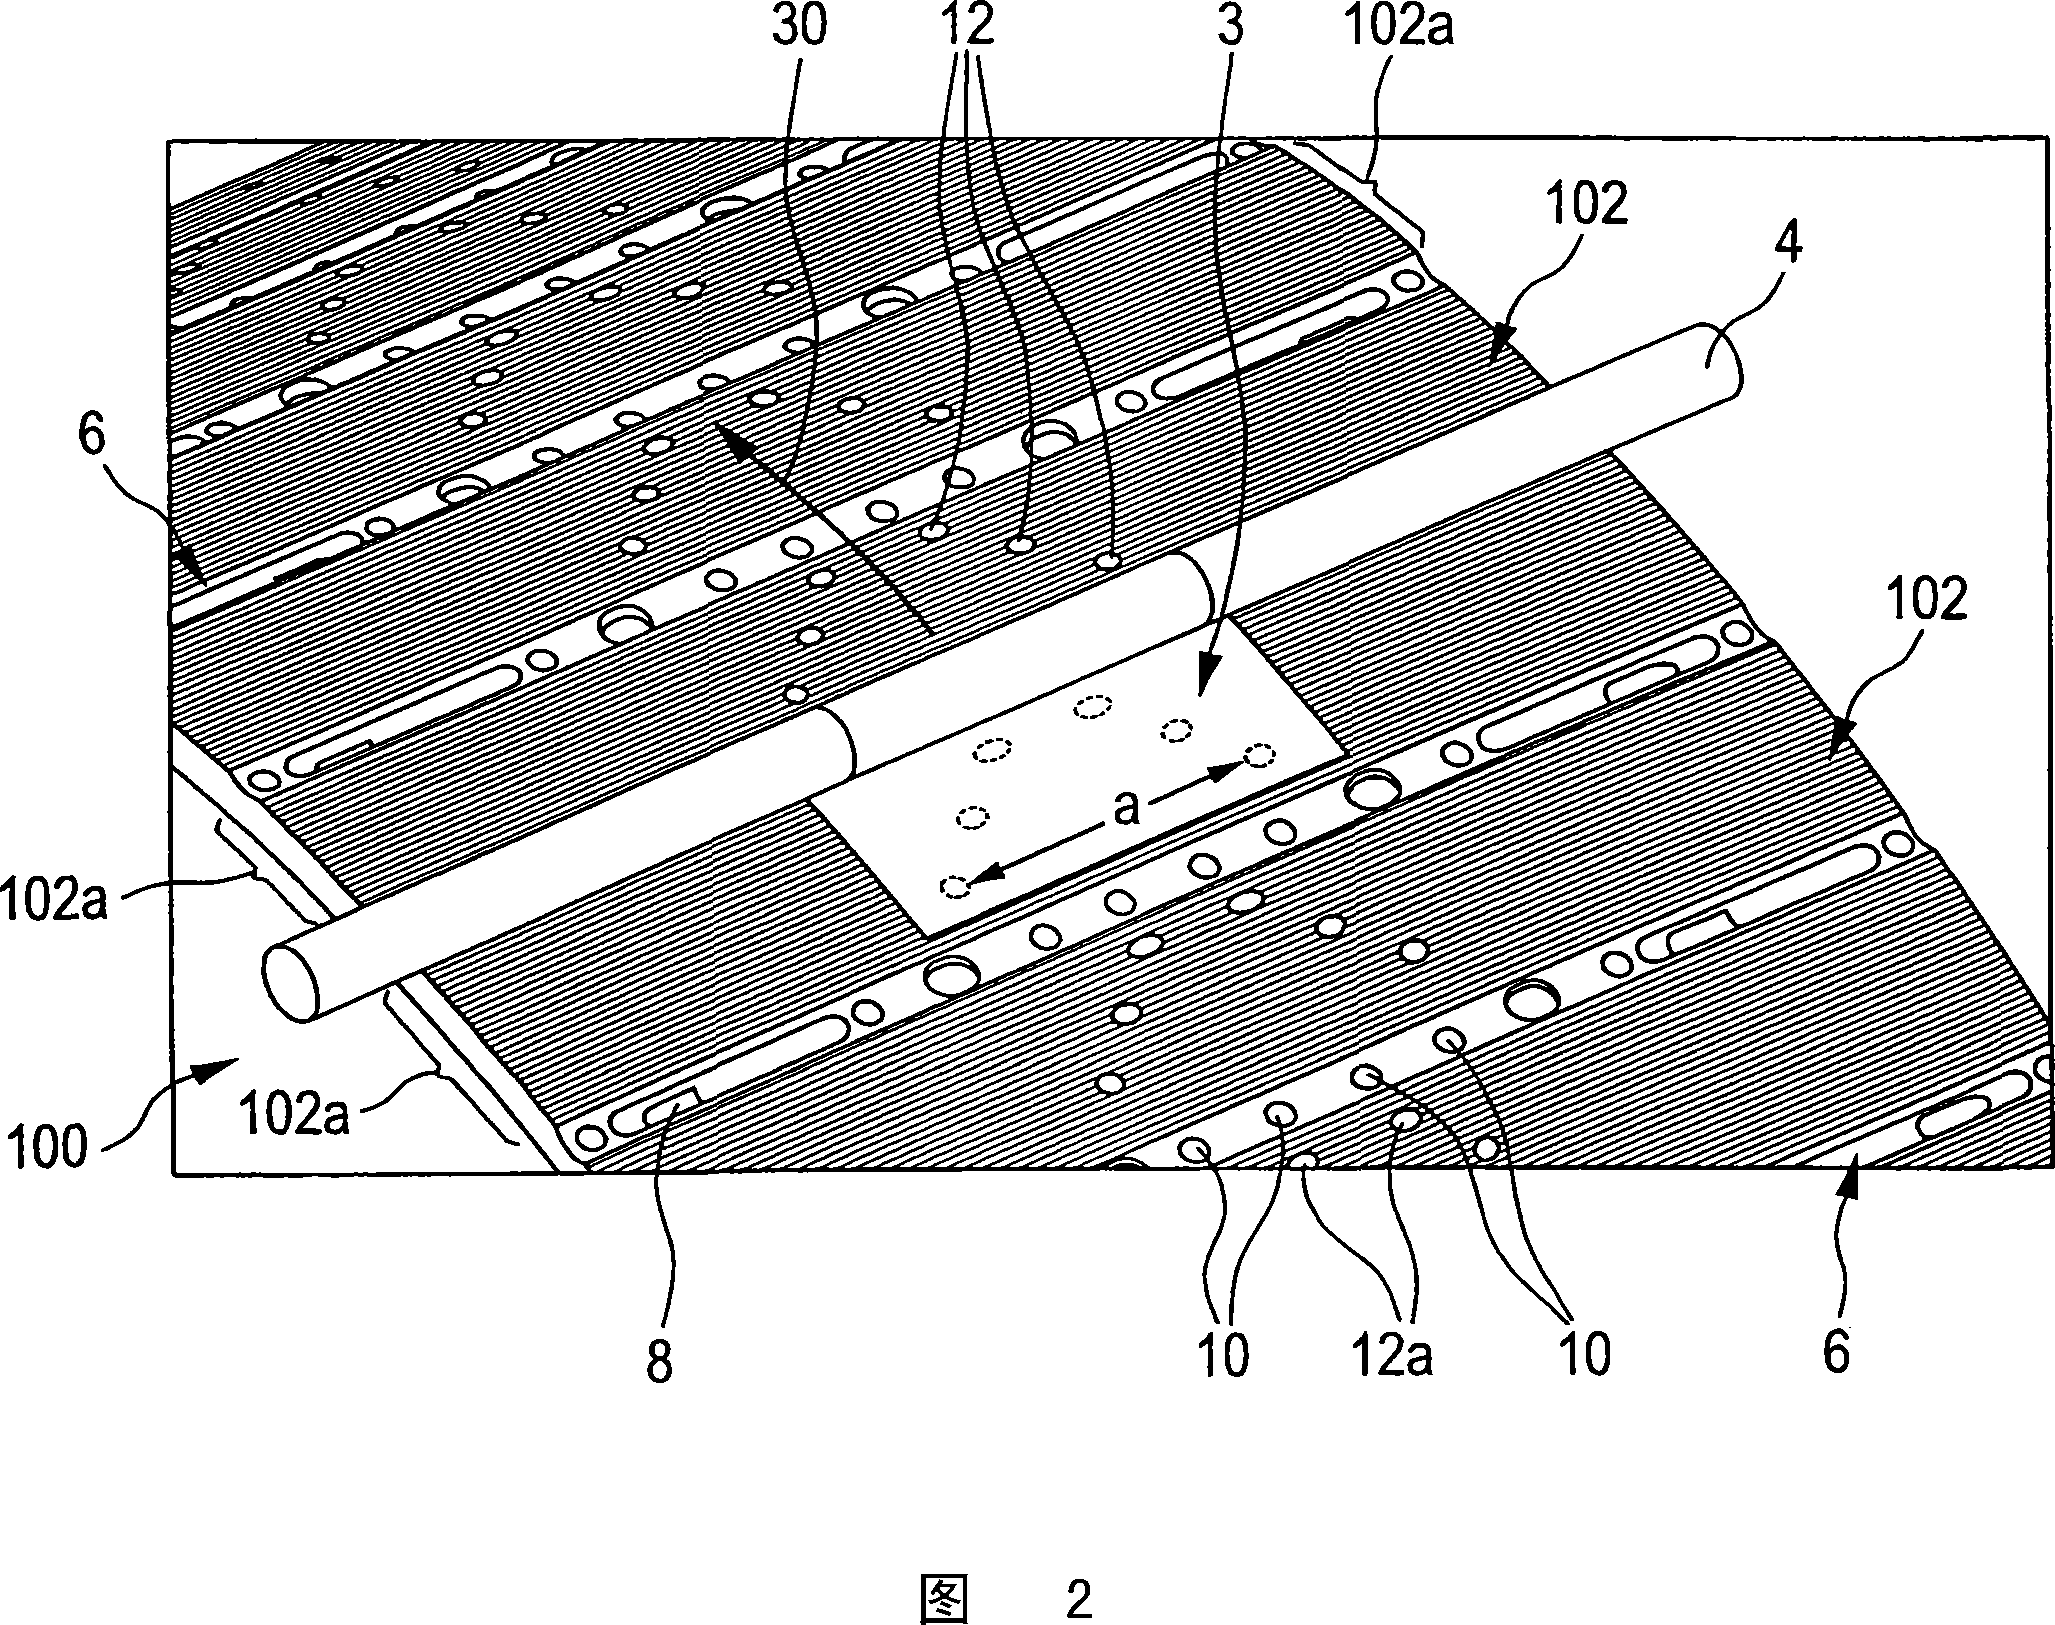 V-shaped assembly of suction apertures